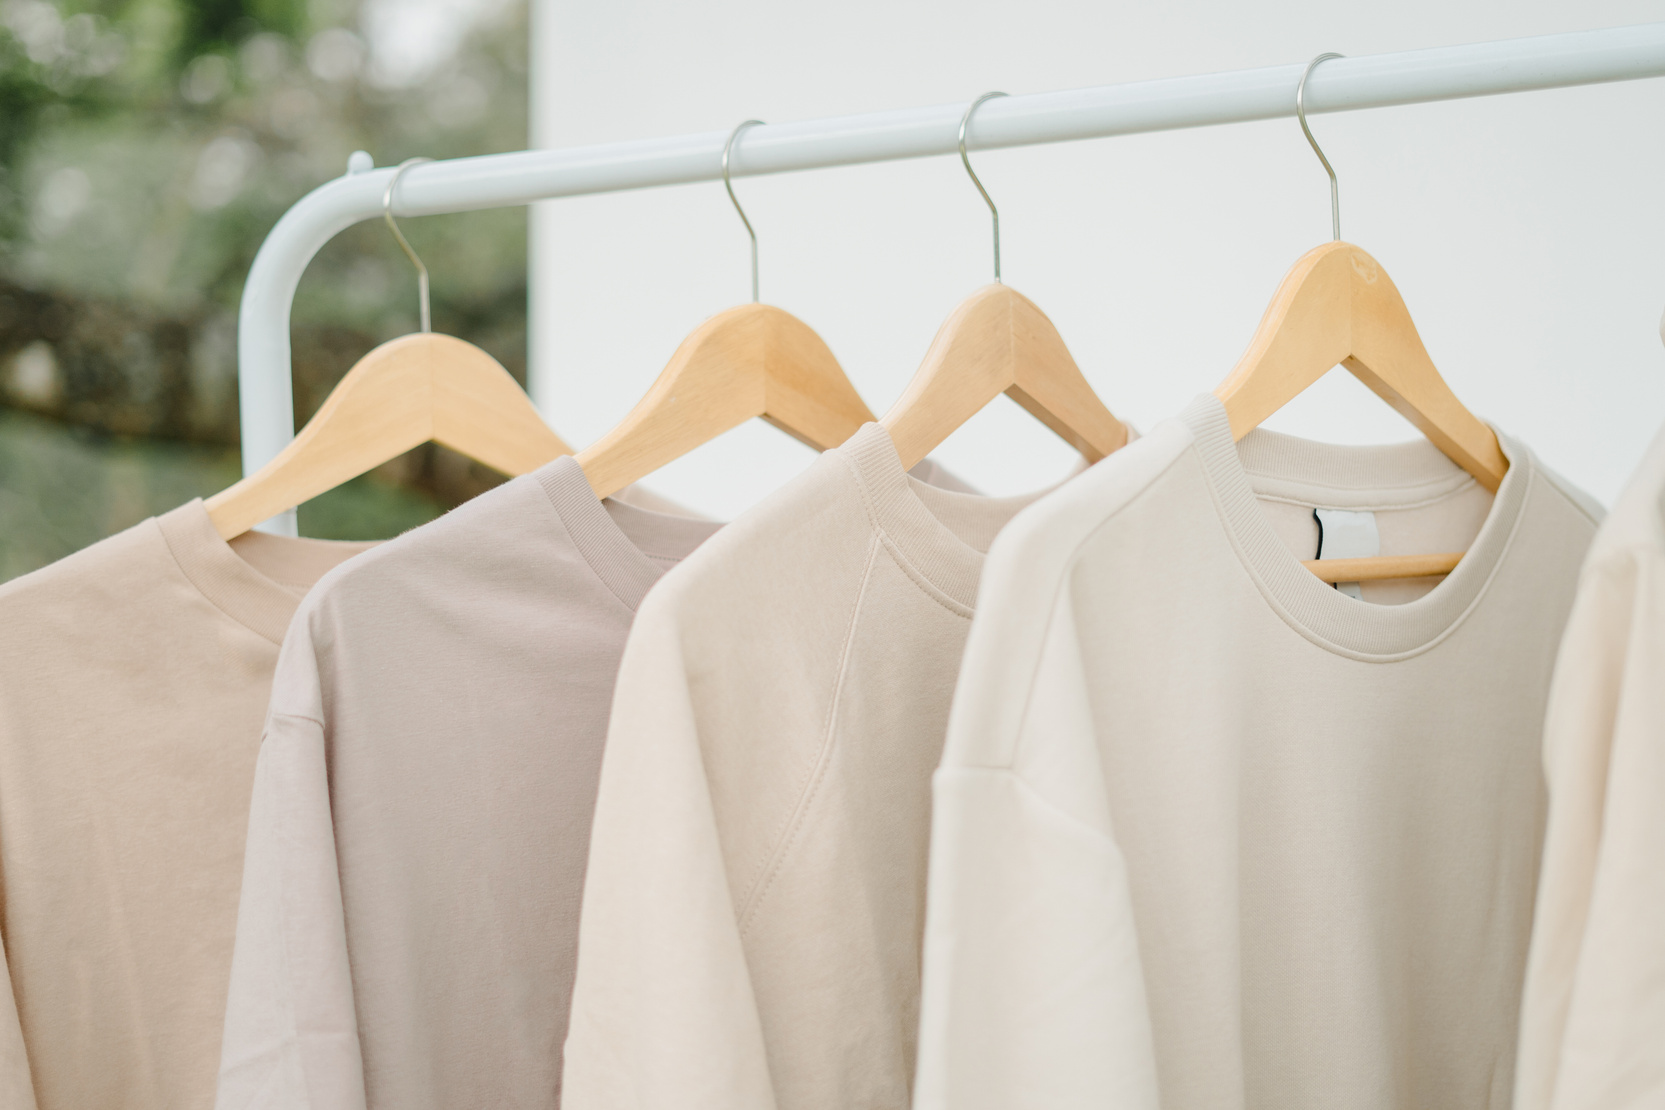 Earth Tone Colored Shirts Hanging on a Rack